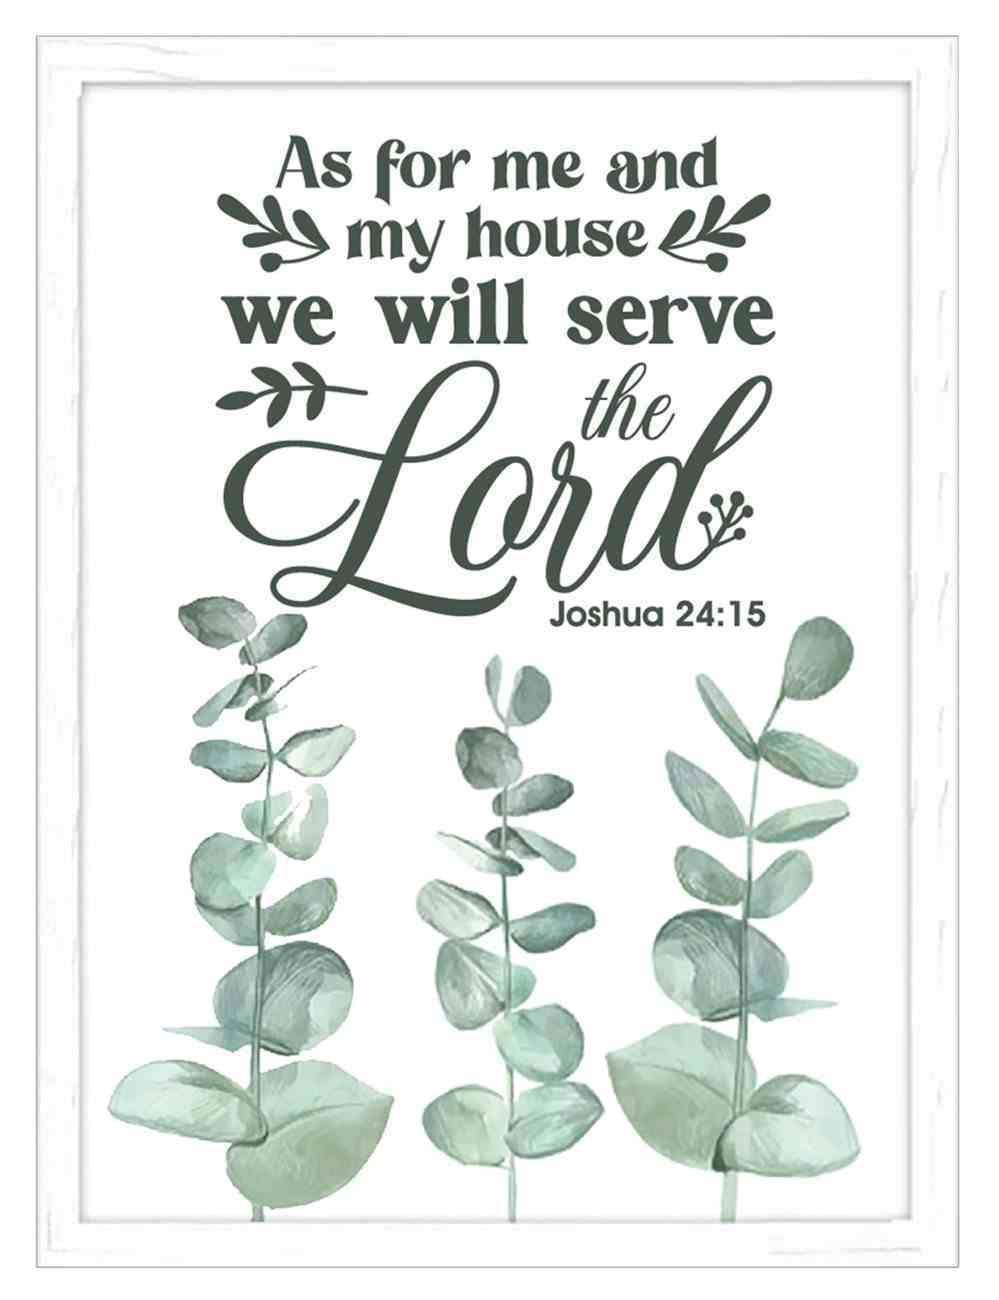 Mdf Framed Wall Art: As For Me and My House We Will Serve the Lord (Joshua 24:15) Plaque